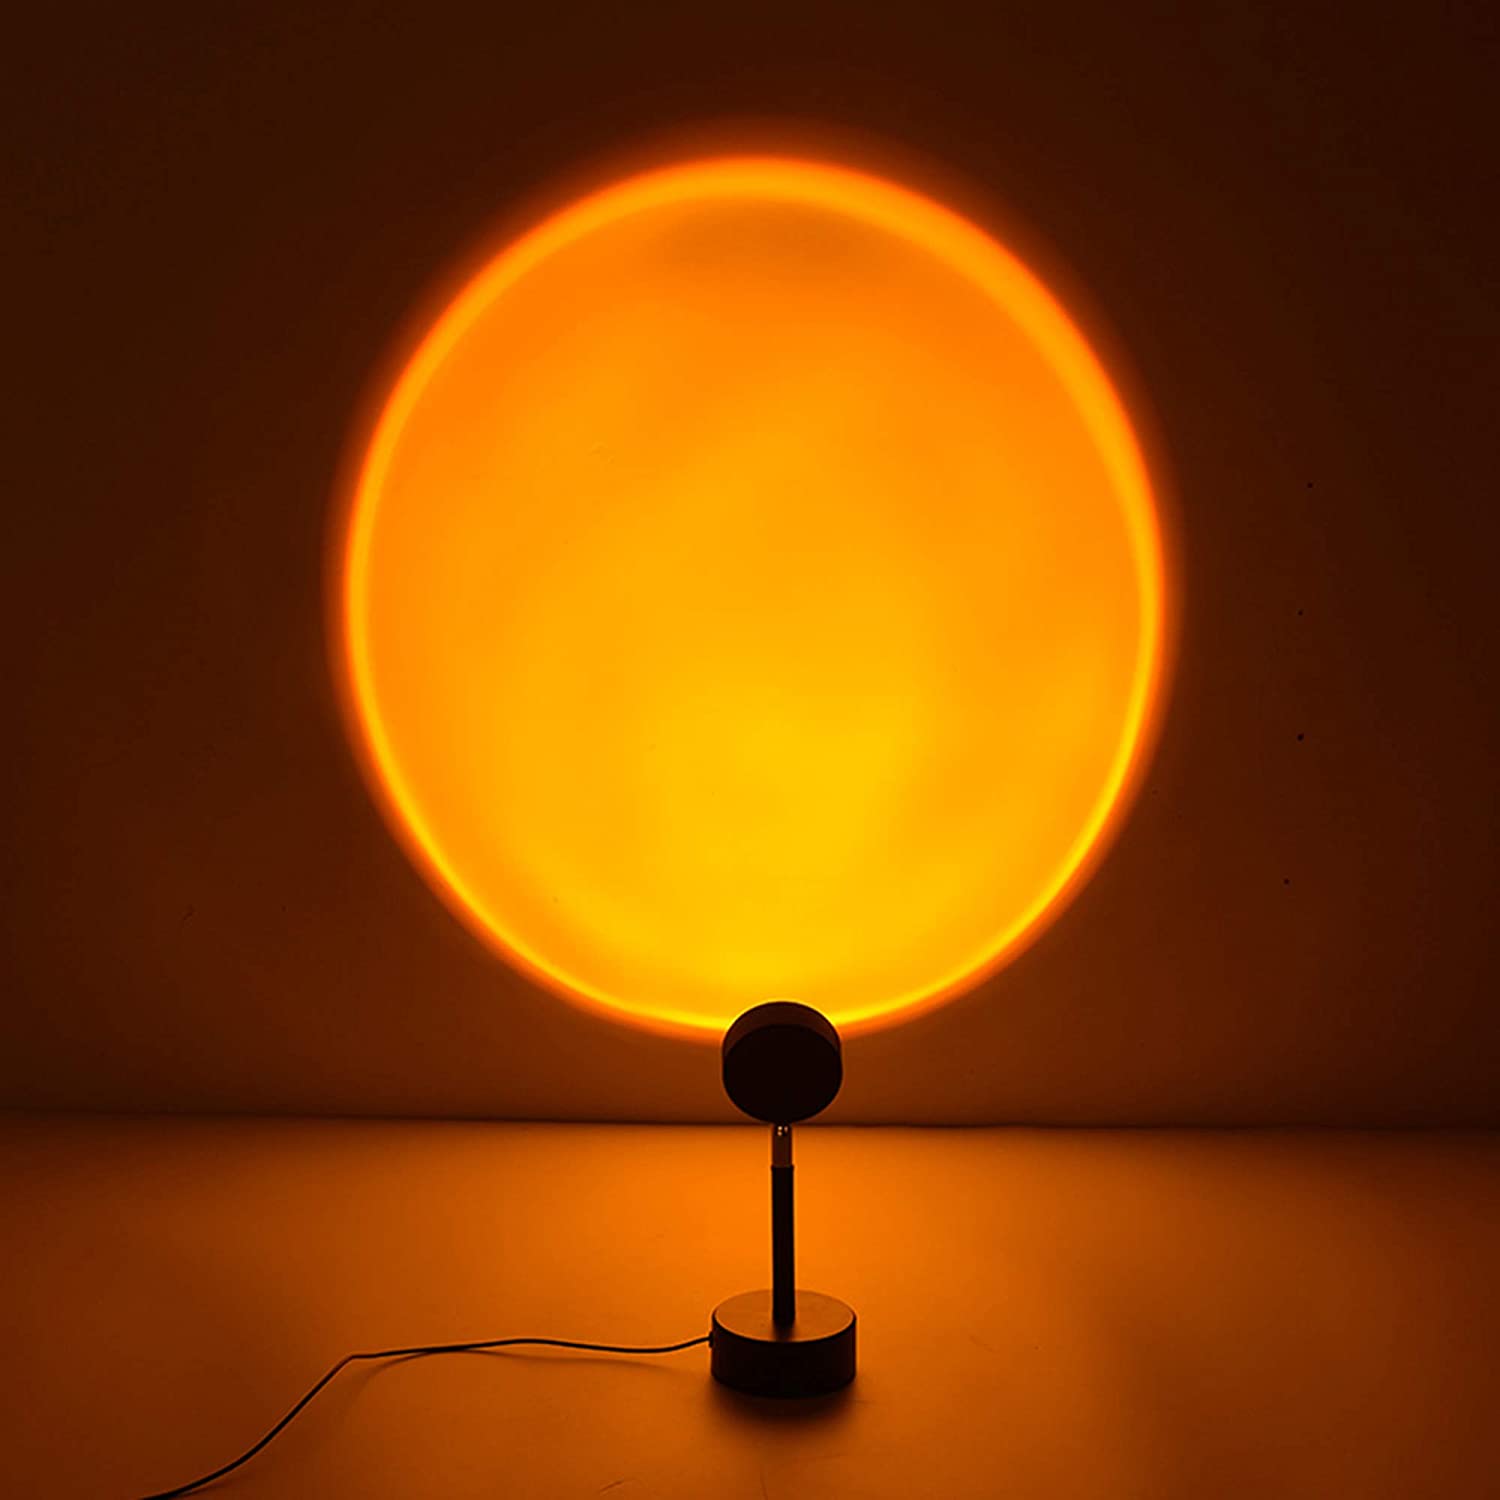 Shop The Sunset Lamps That Went Viral On TikTok | HelloGiggles